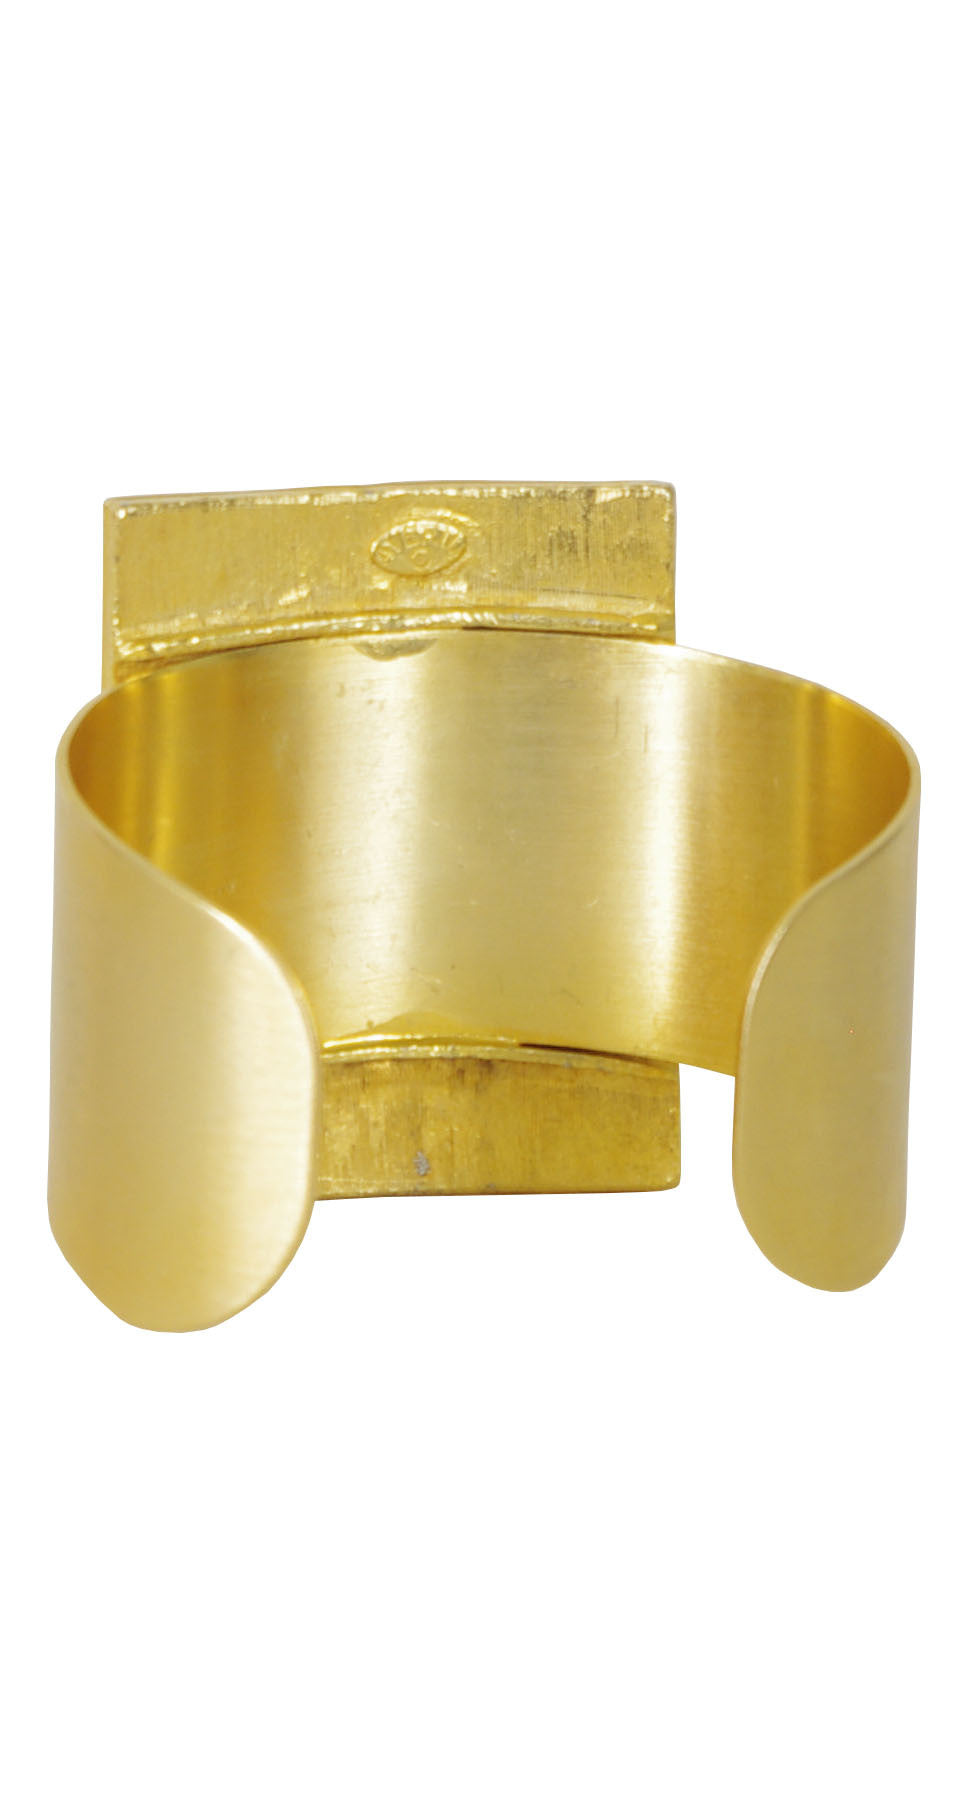 1970s Deadstock Modernist Large Gold Tone Cuff